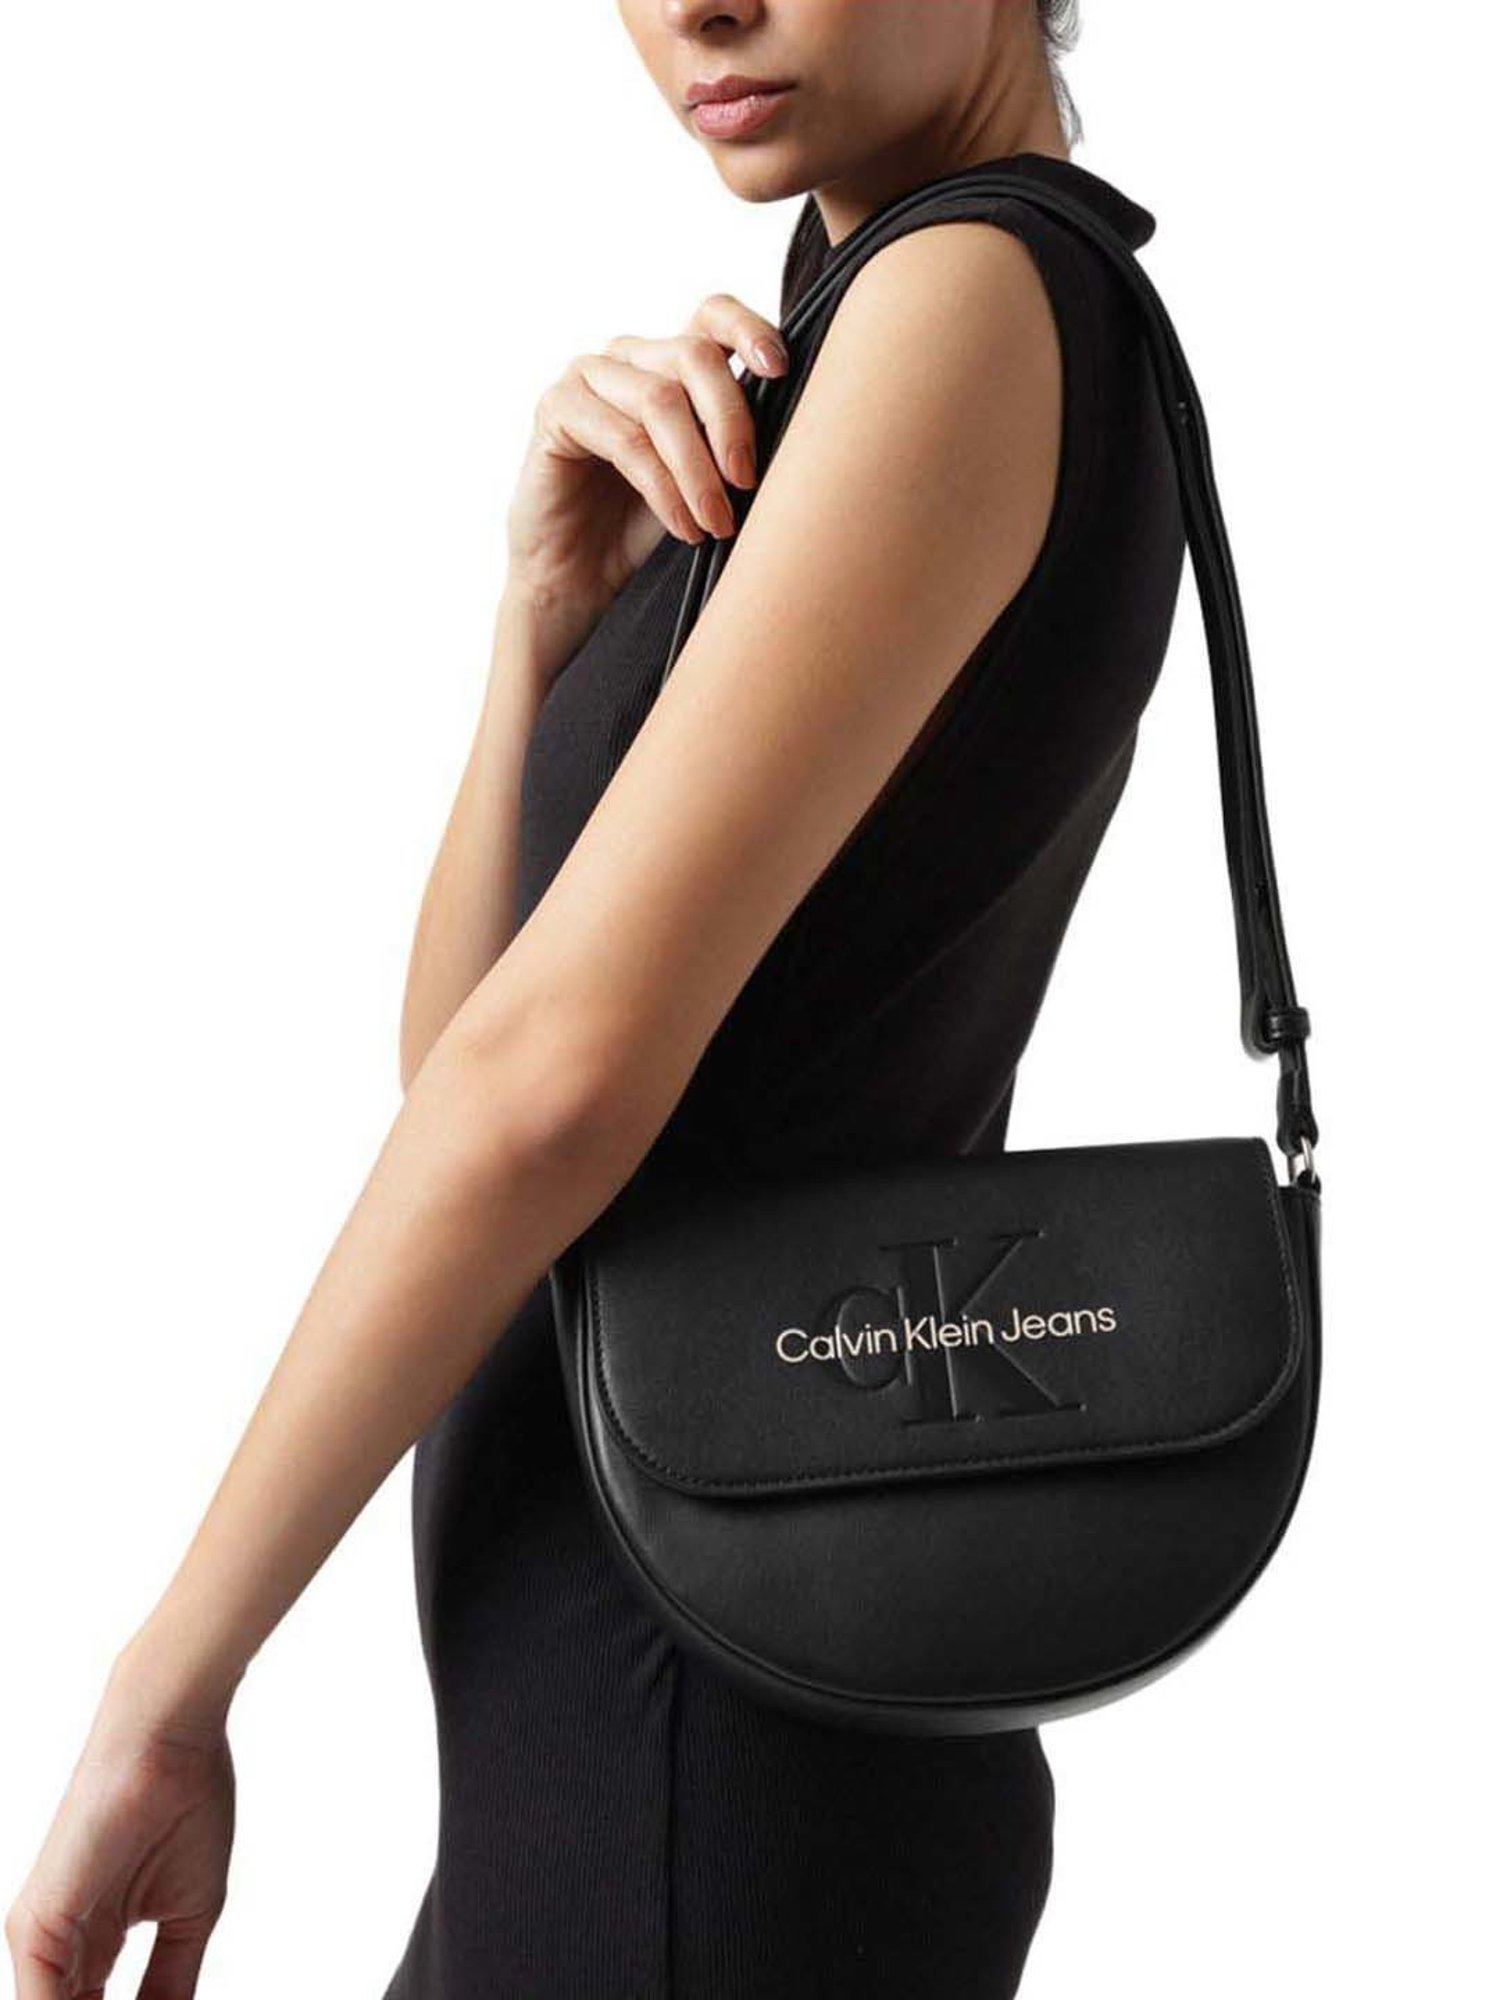 Calvin Klein Jeans SPORT ESSENTIALS DUFFLE43 M Black - Fast delivery |  Spartoo Europe ! - Bags Luggage 88,00 €